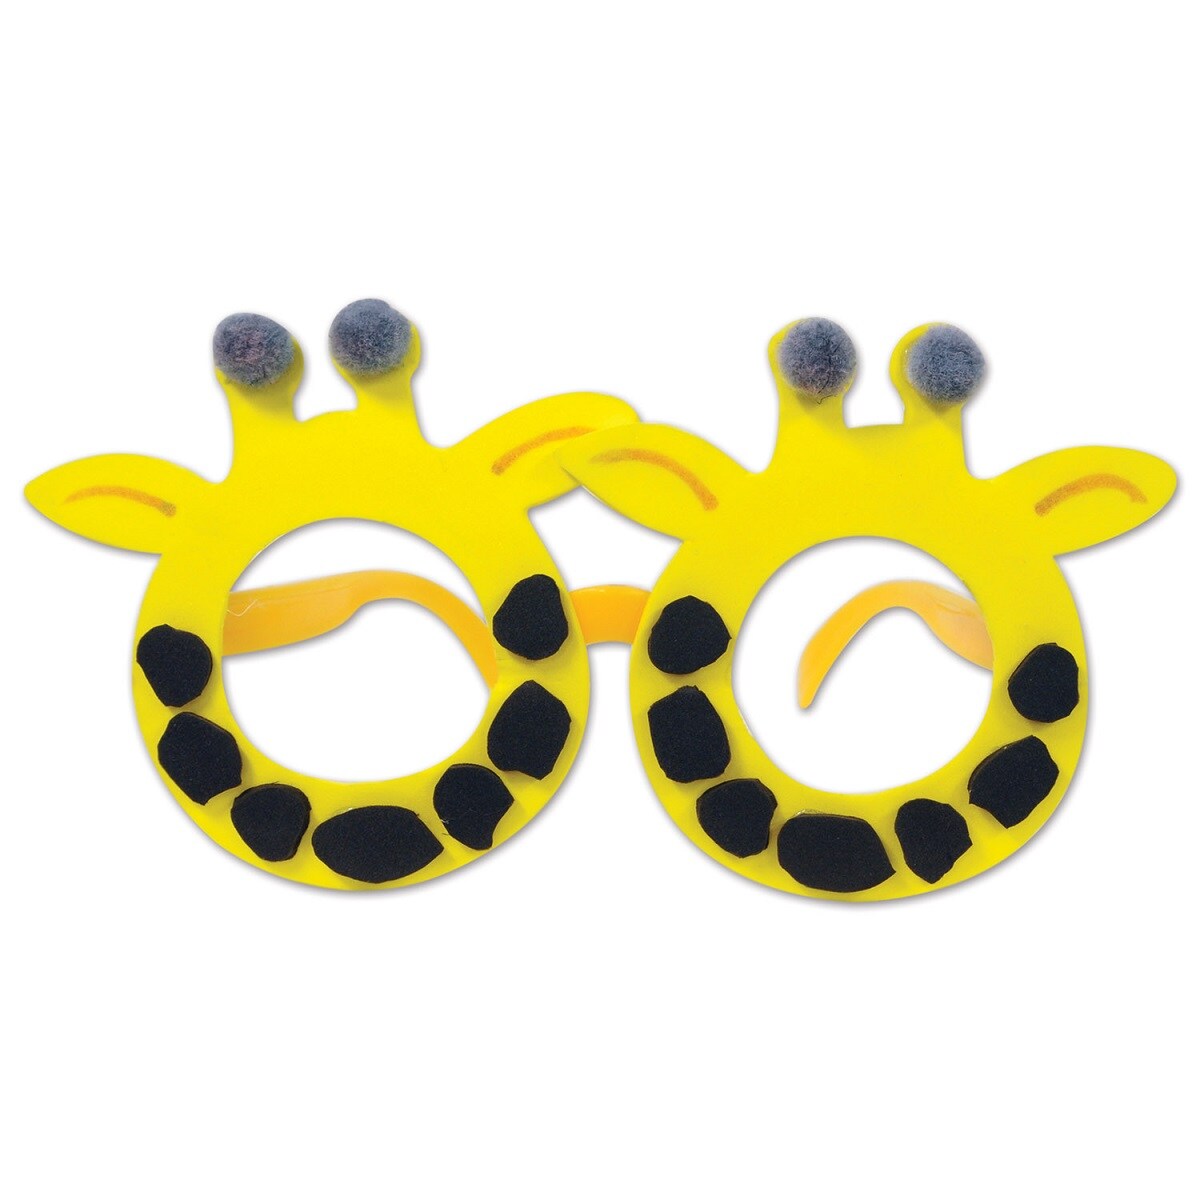 Party Central Club Pack of 12 Yellow and Black Giraffe Party Eyeglasses Costume Accessories - One Size